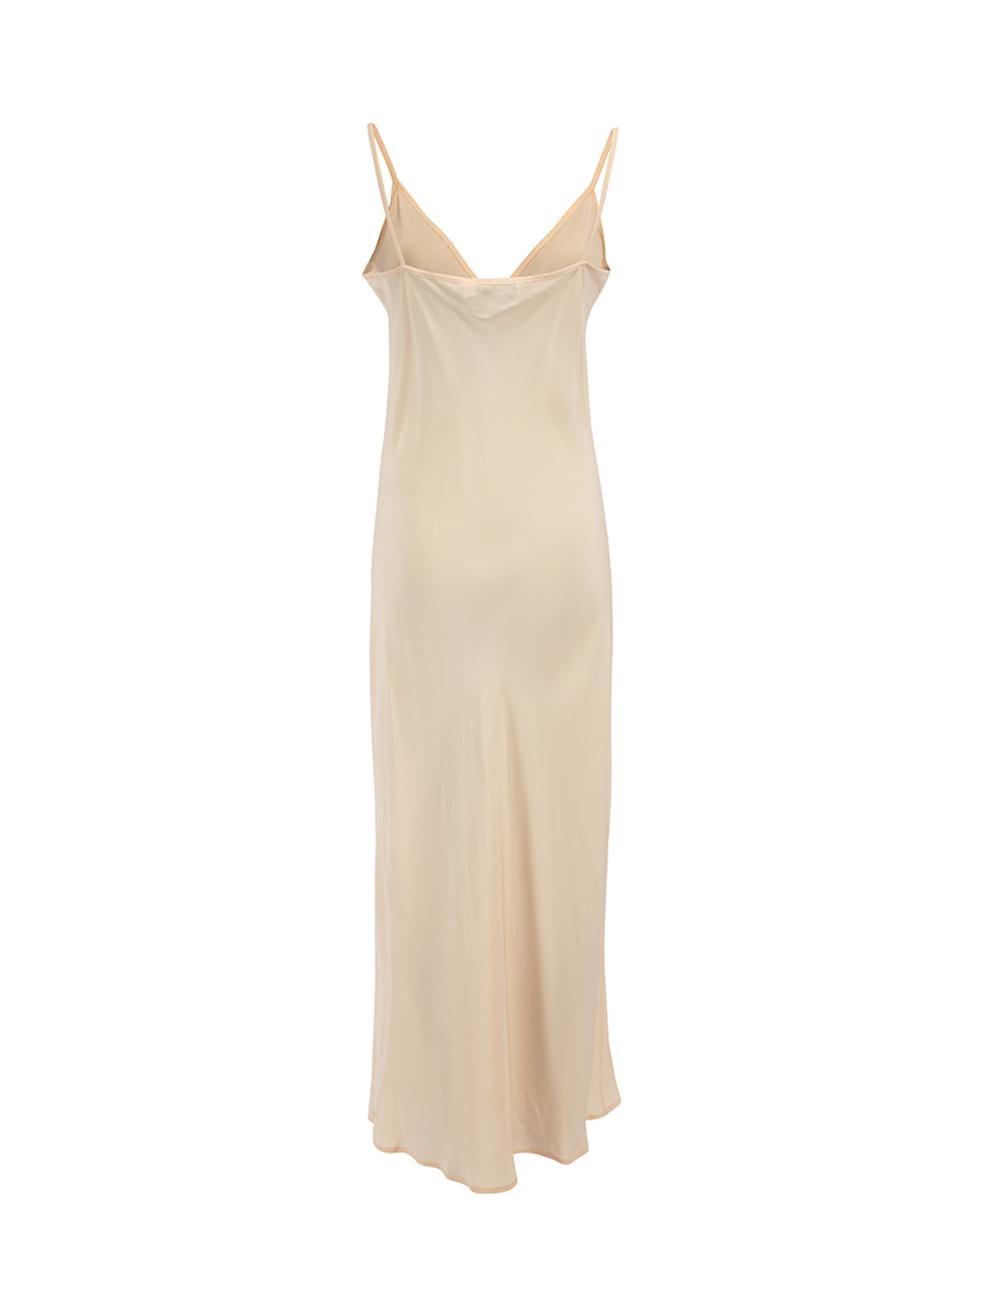 Pre-Loved Christian Dior Women's Pink Sheer Maxi Slip Dress In Excellent Condition In London, GB